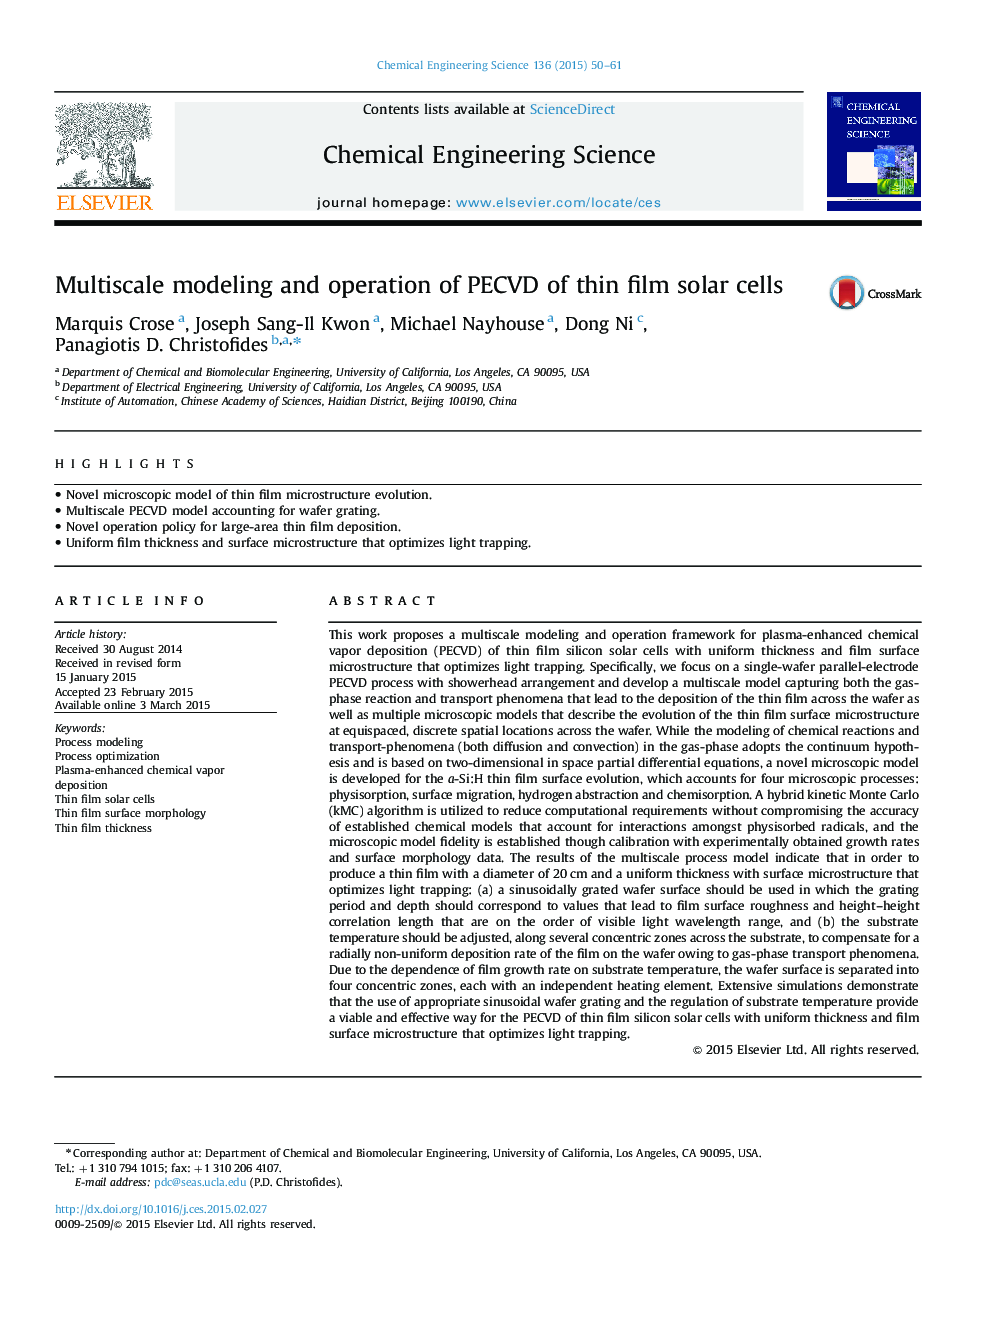 Multiscale modeling and operation of PECVD of thin film solar cells